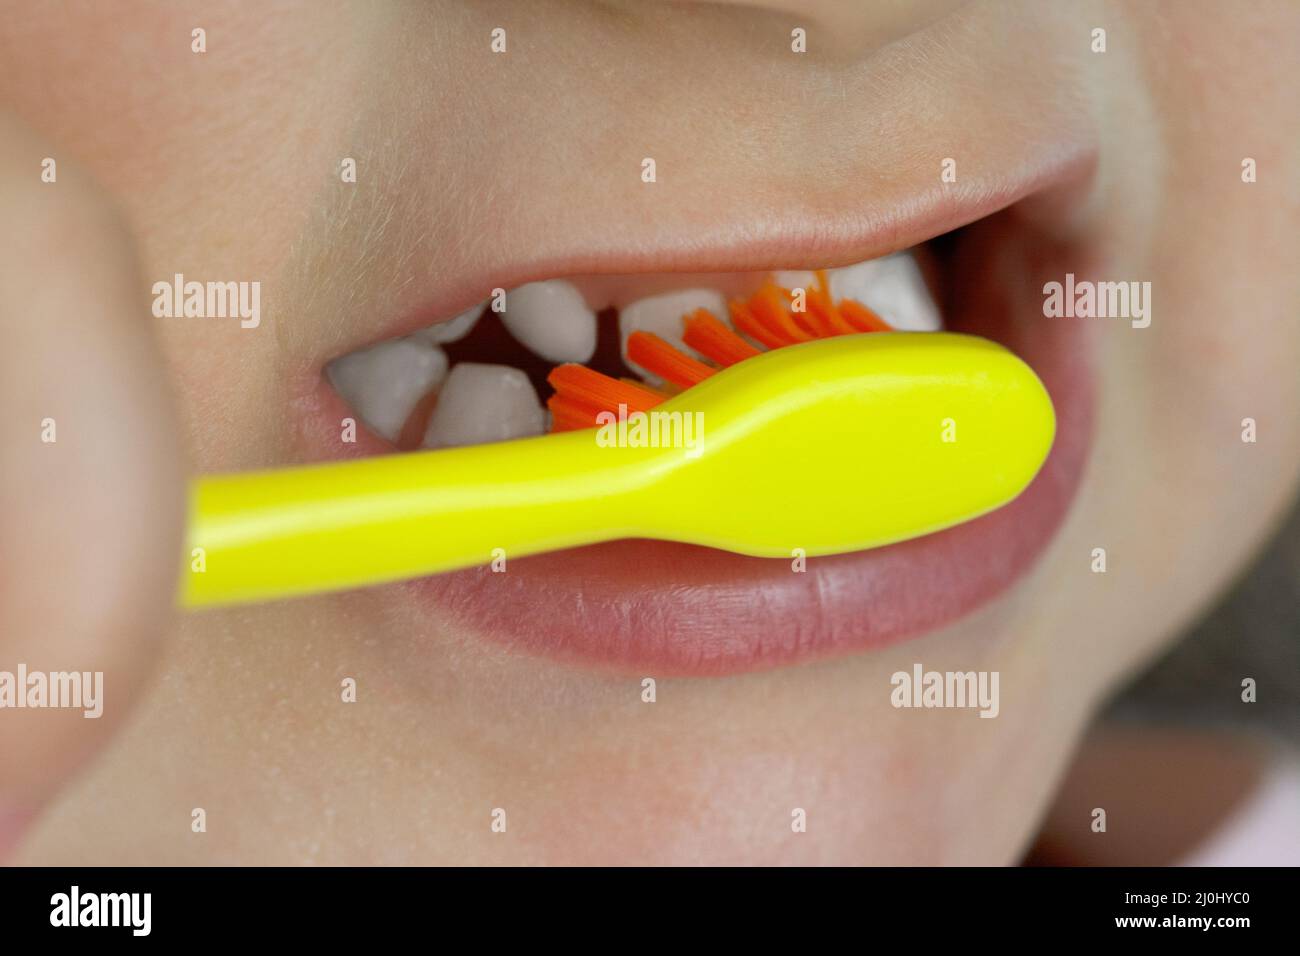 Toddler brushes her teeth with toothbrush Stock Photo